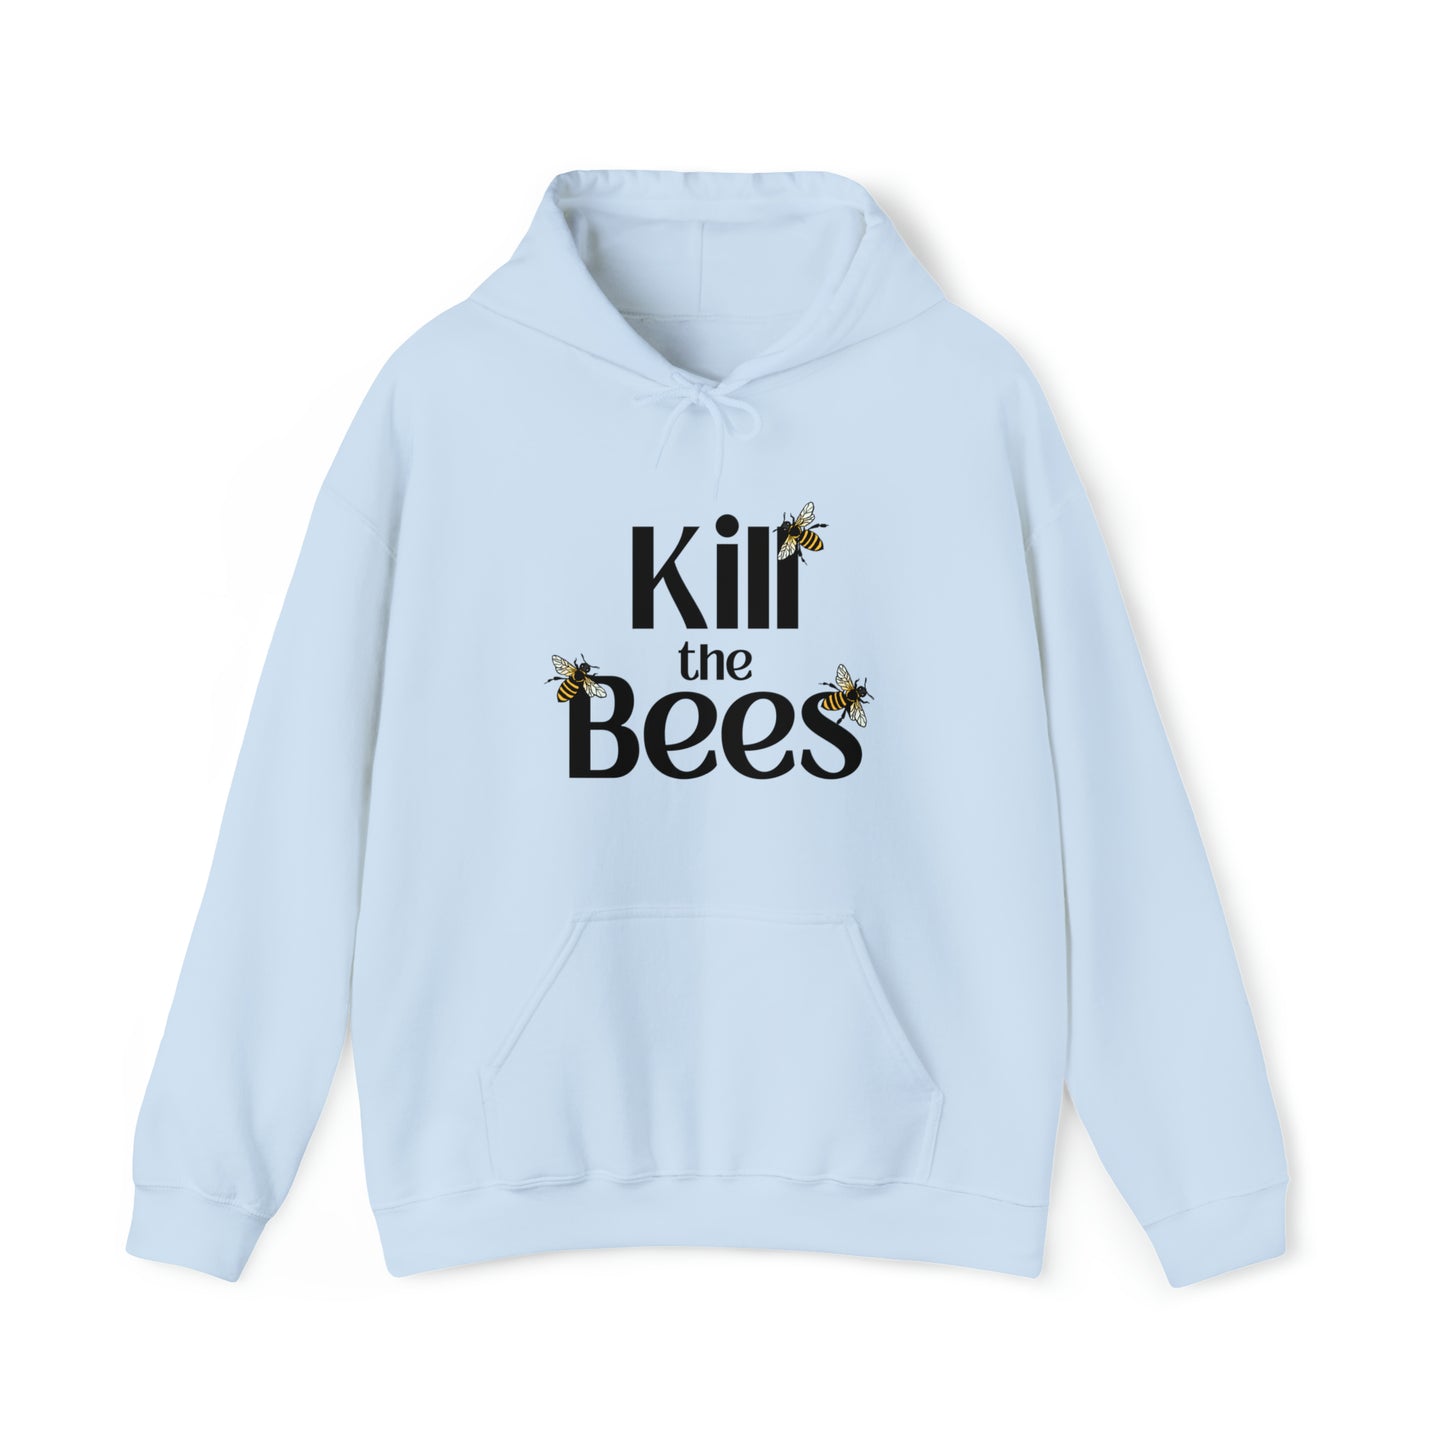 Kill the Bees Hoodie